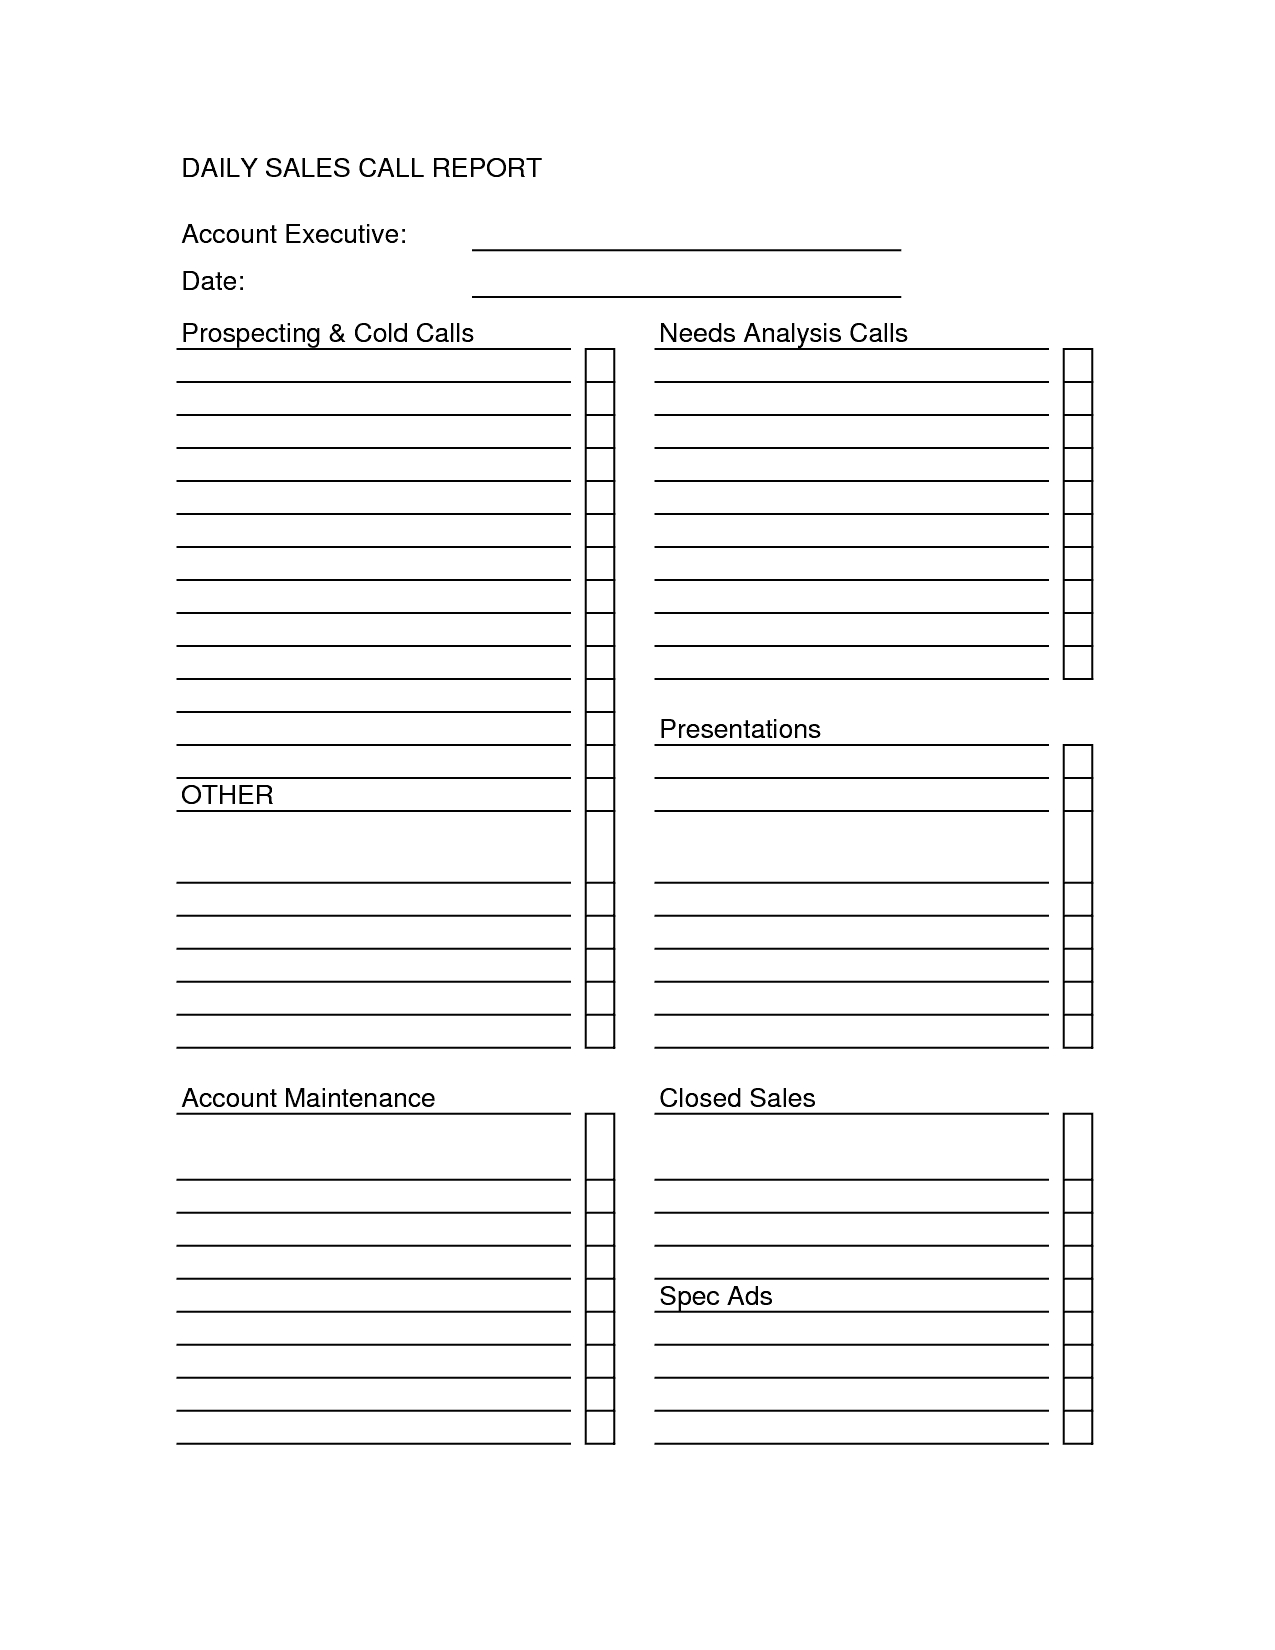 Sales Call Report Templates - Word Excel Fomats Regarding Sales Call Report Template